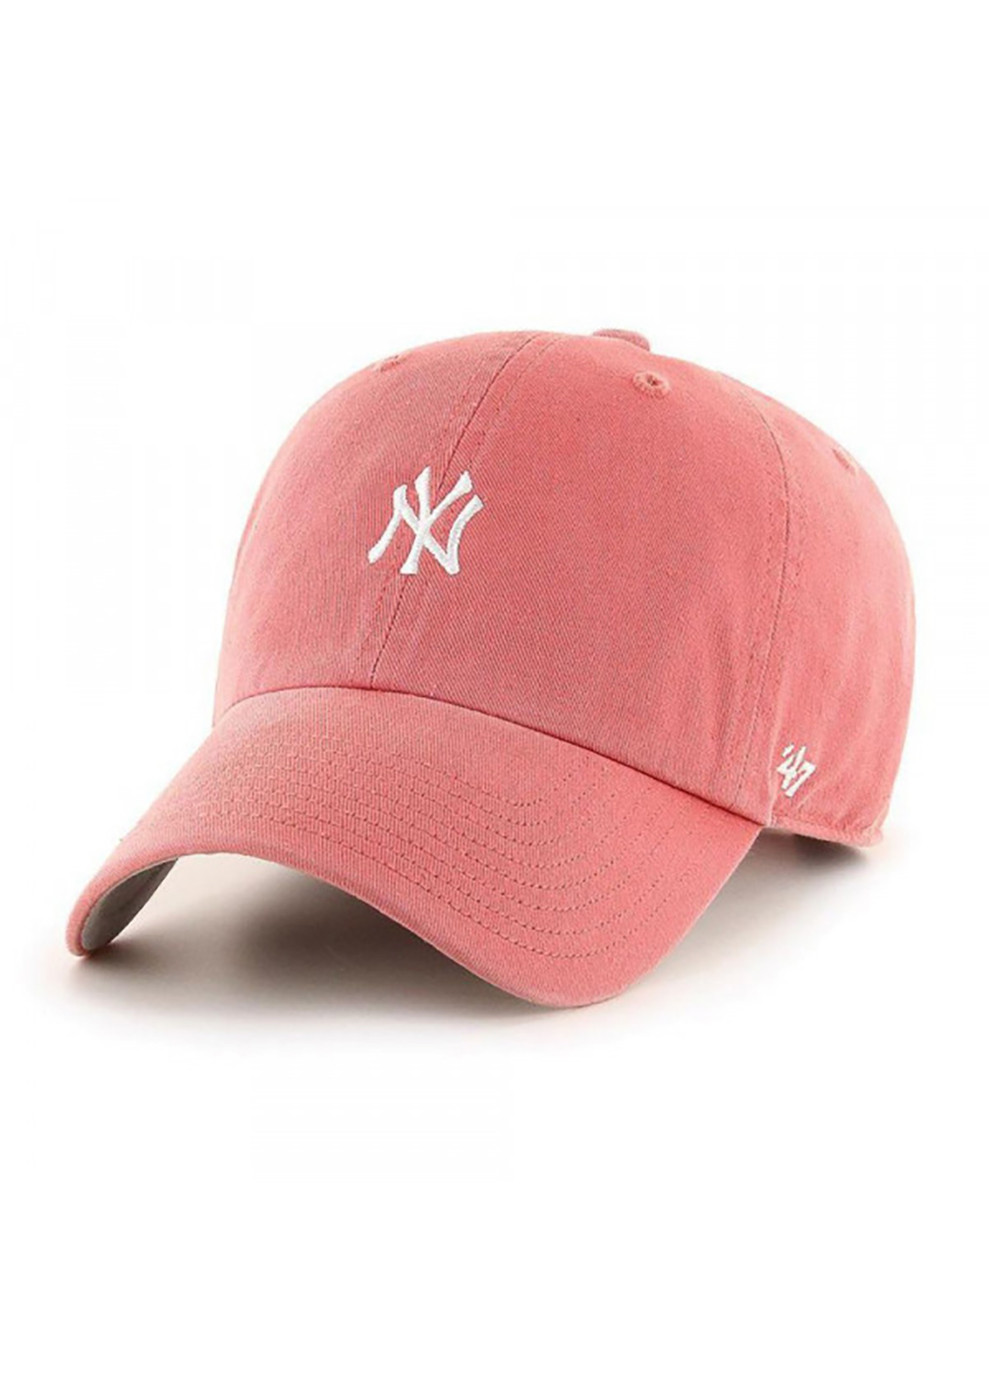 Кепка NY YANKEES BASE RUNNER One Size coral/gray 47 Brand (258133954)